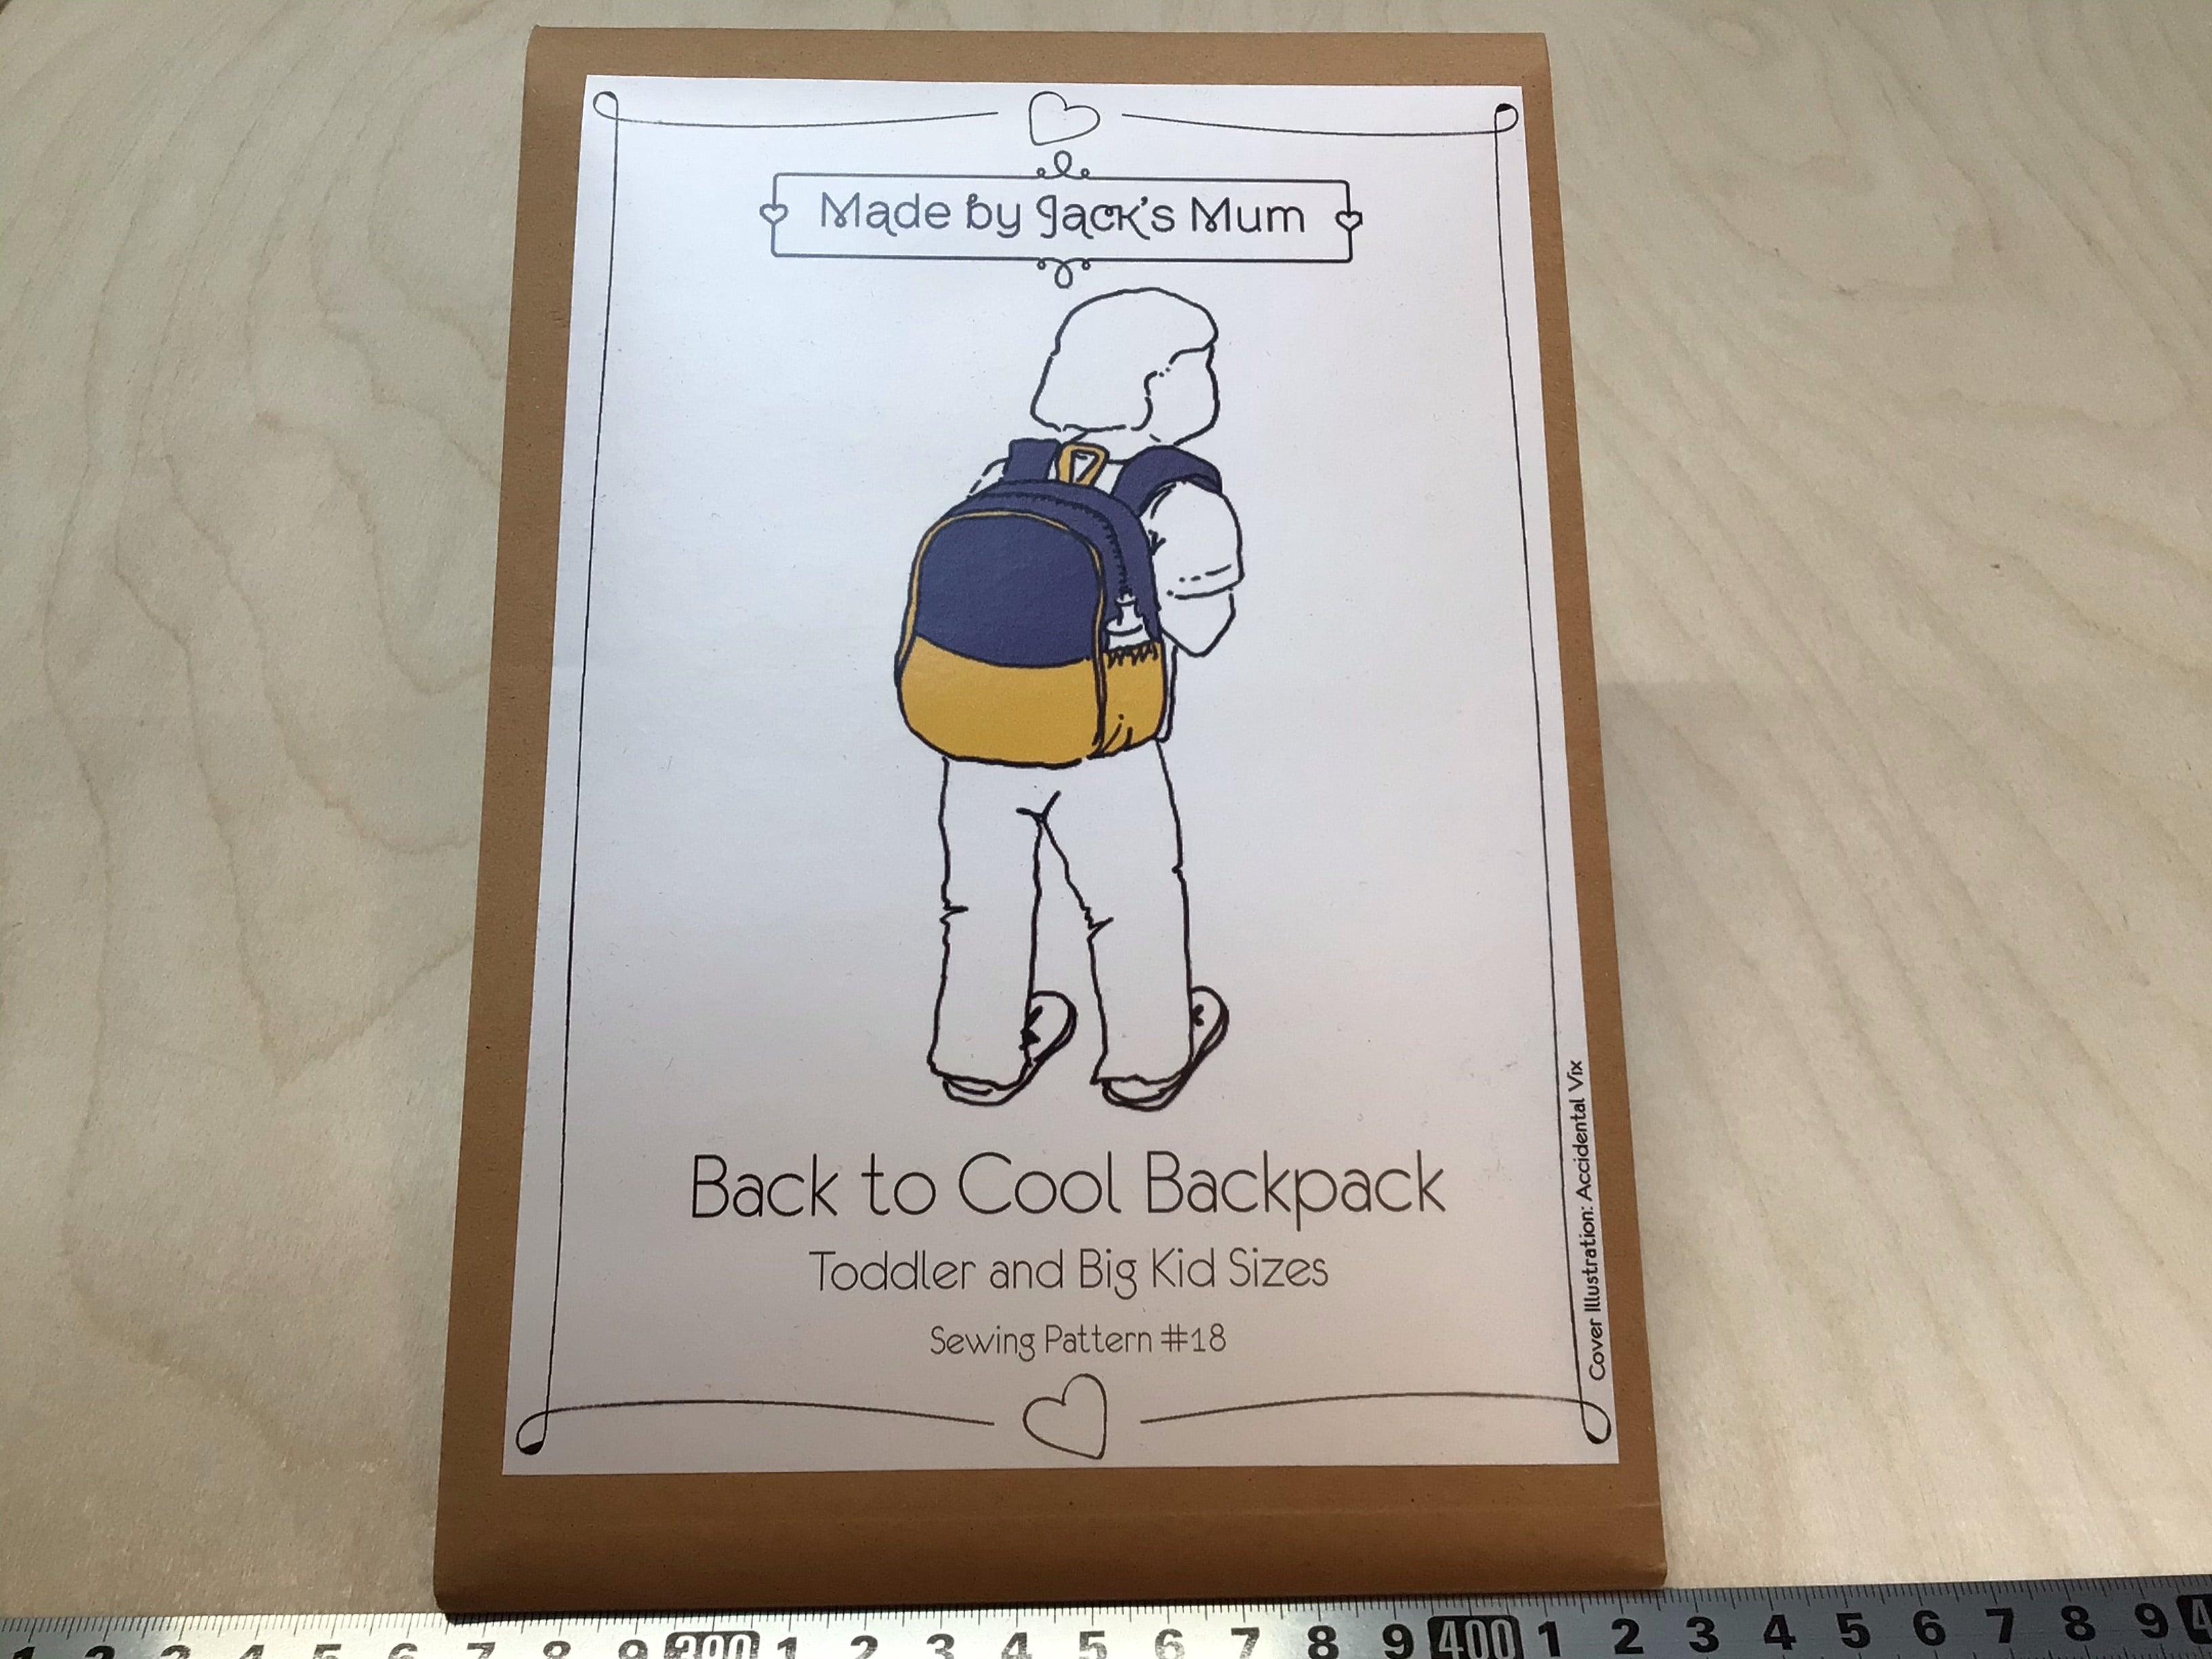 MBJM Back to Cool Backpack Paper Sewing Pattern